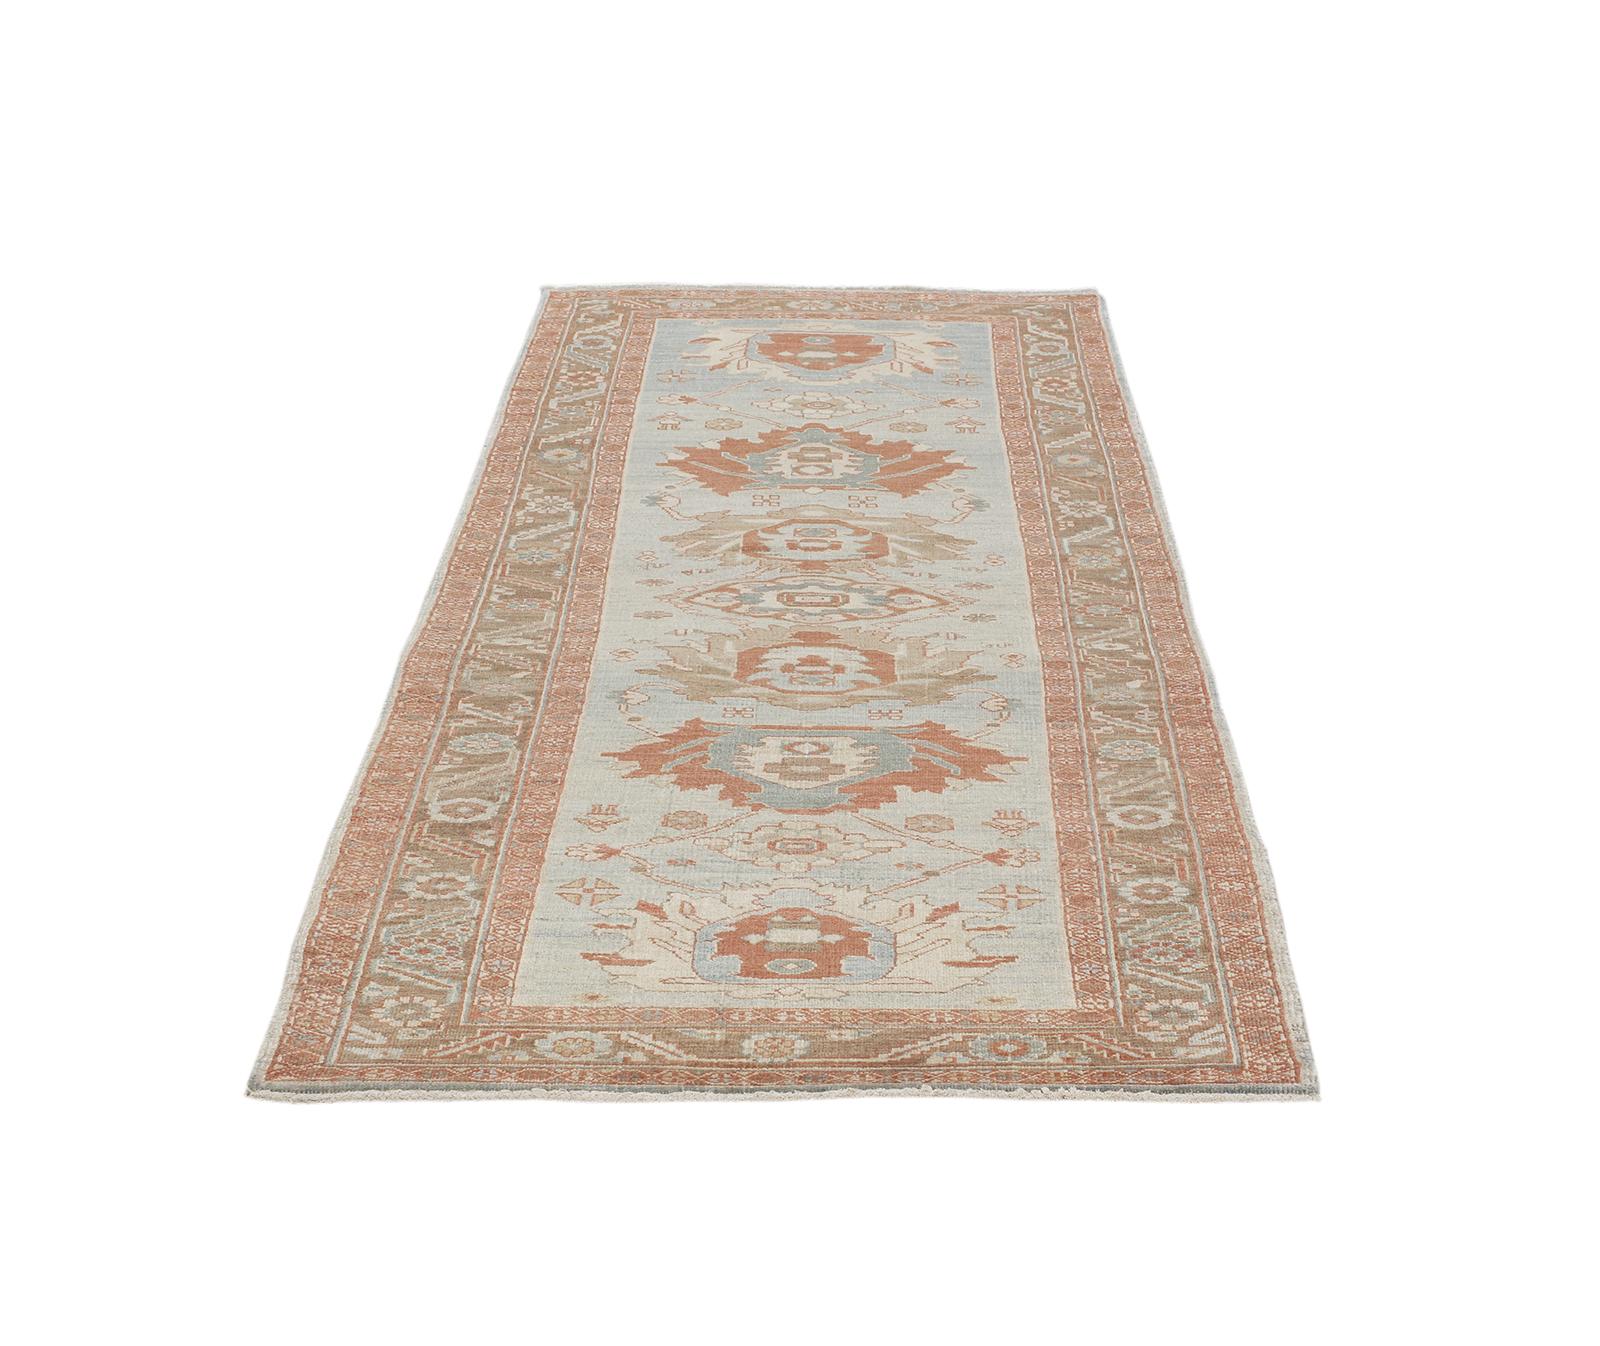 Kilim Persian Traditional Bakshaish Hand Knotted Runner in Camel, Blue, Rust Colors For Sale